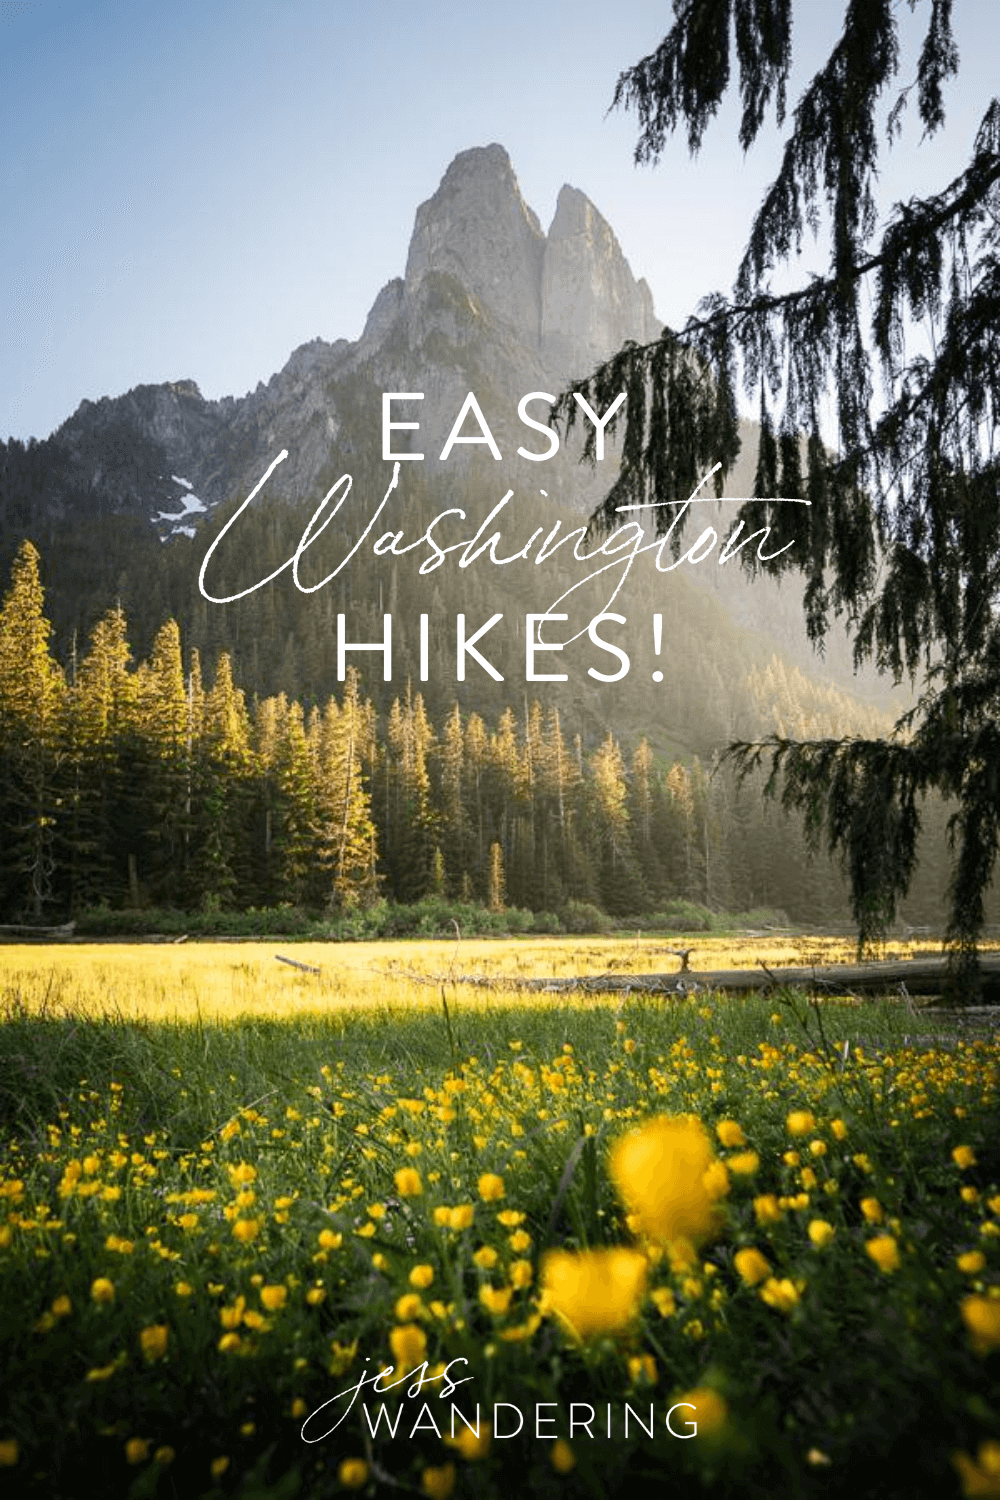 The best easy hikes in Washington.